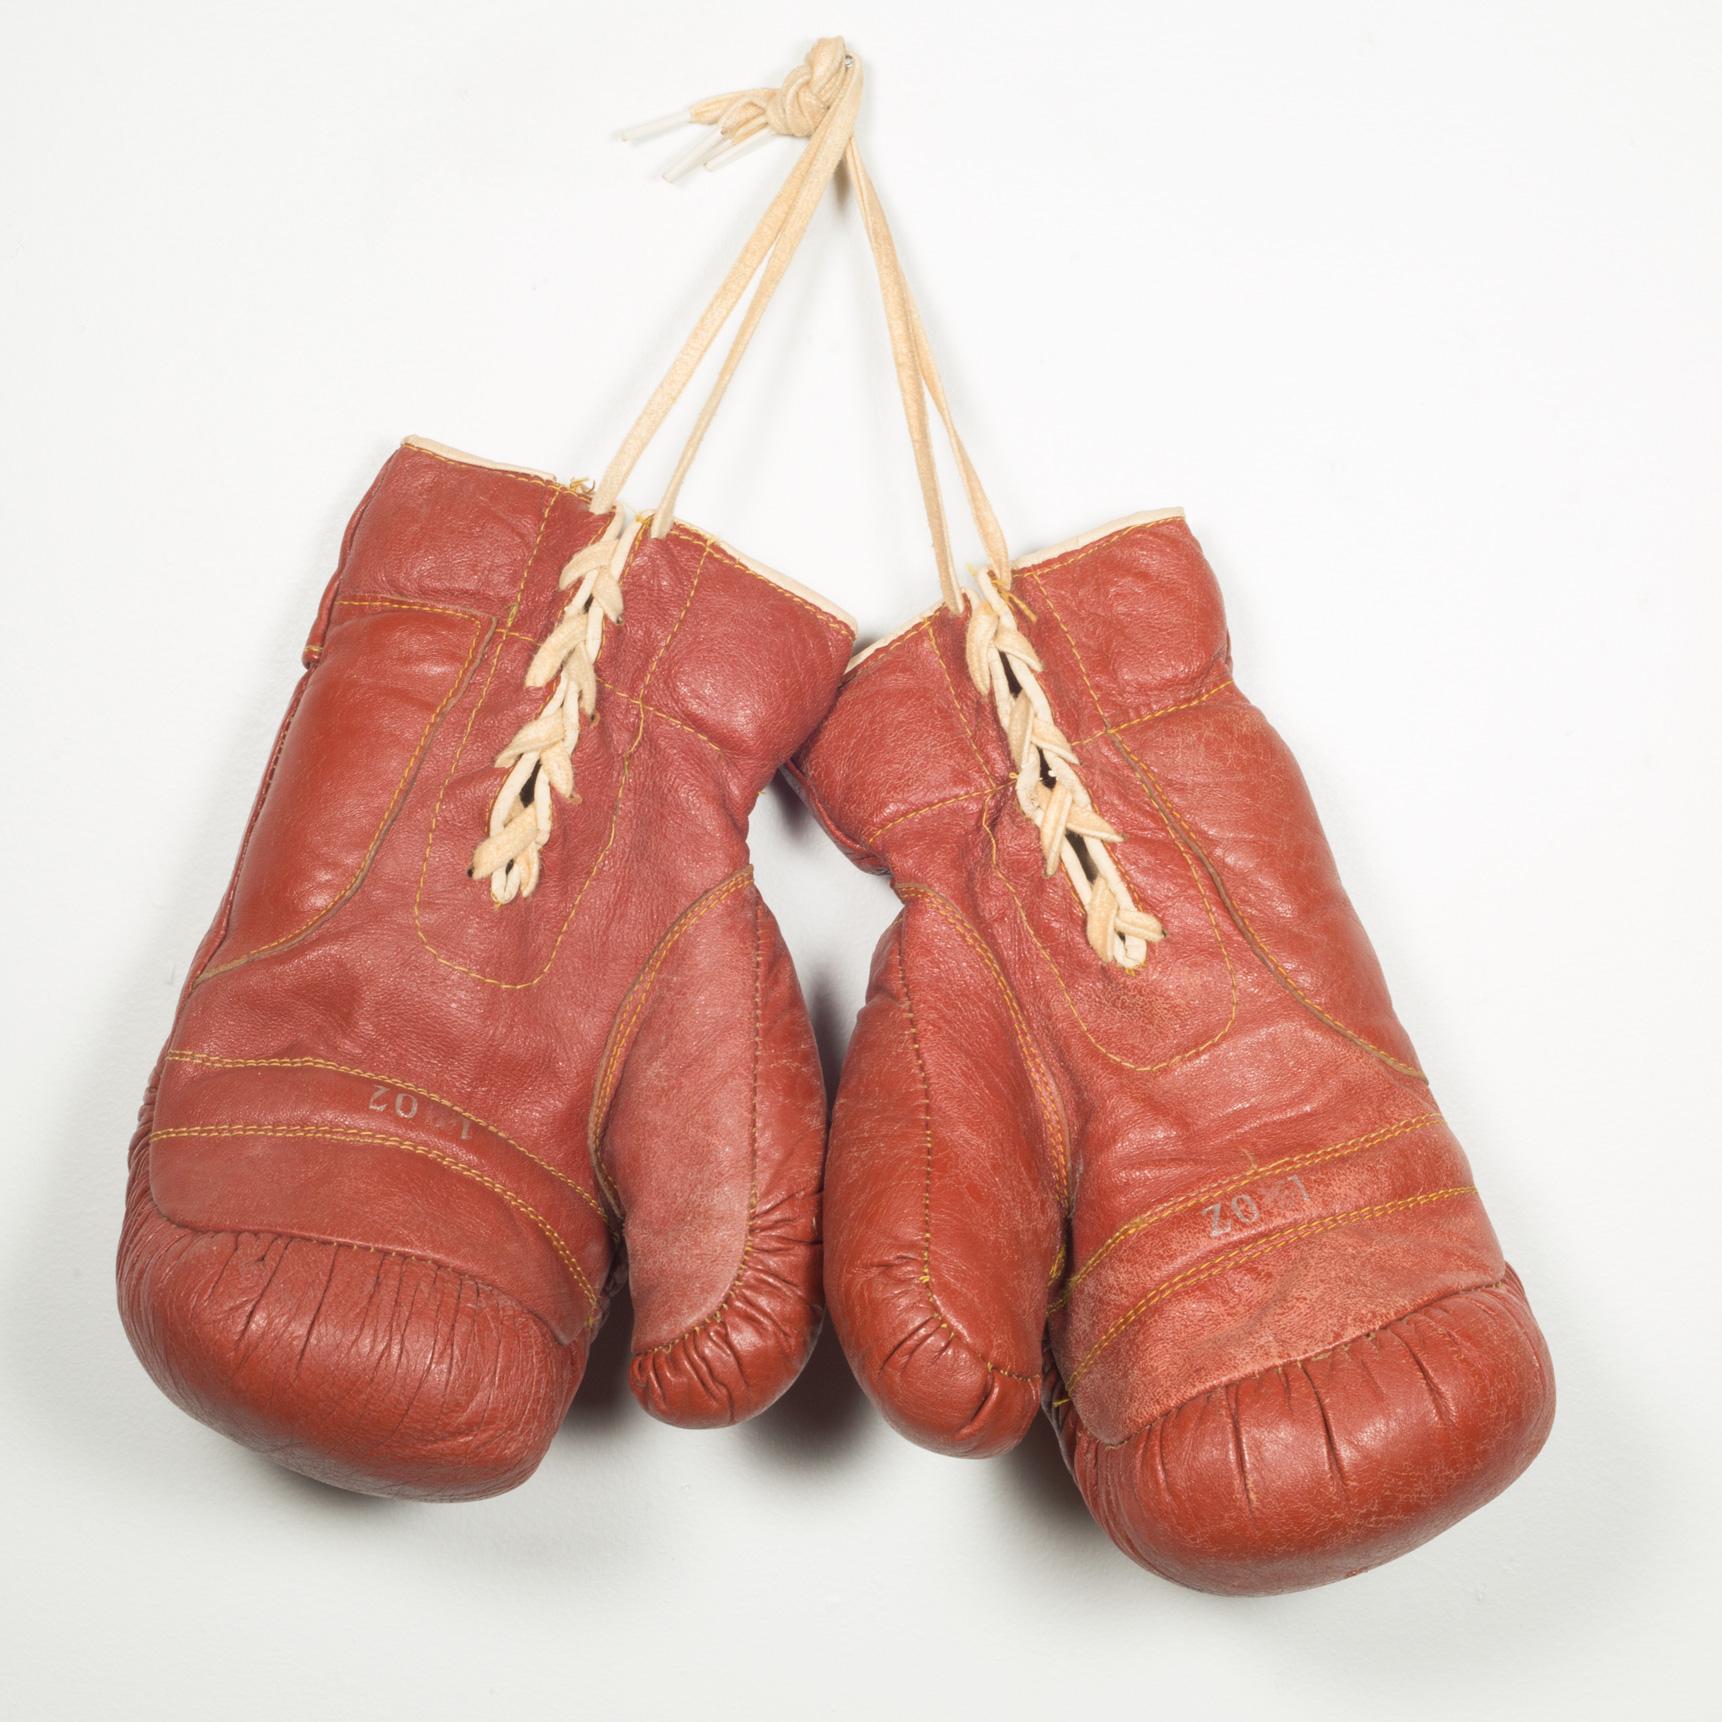 Industrial Vintage Leather Markwort Boxing Gloves c.1950 (FREE SHIPPING)